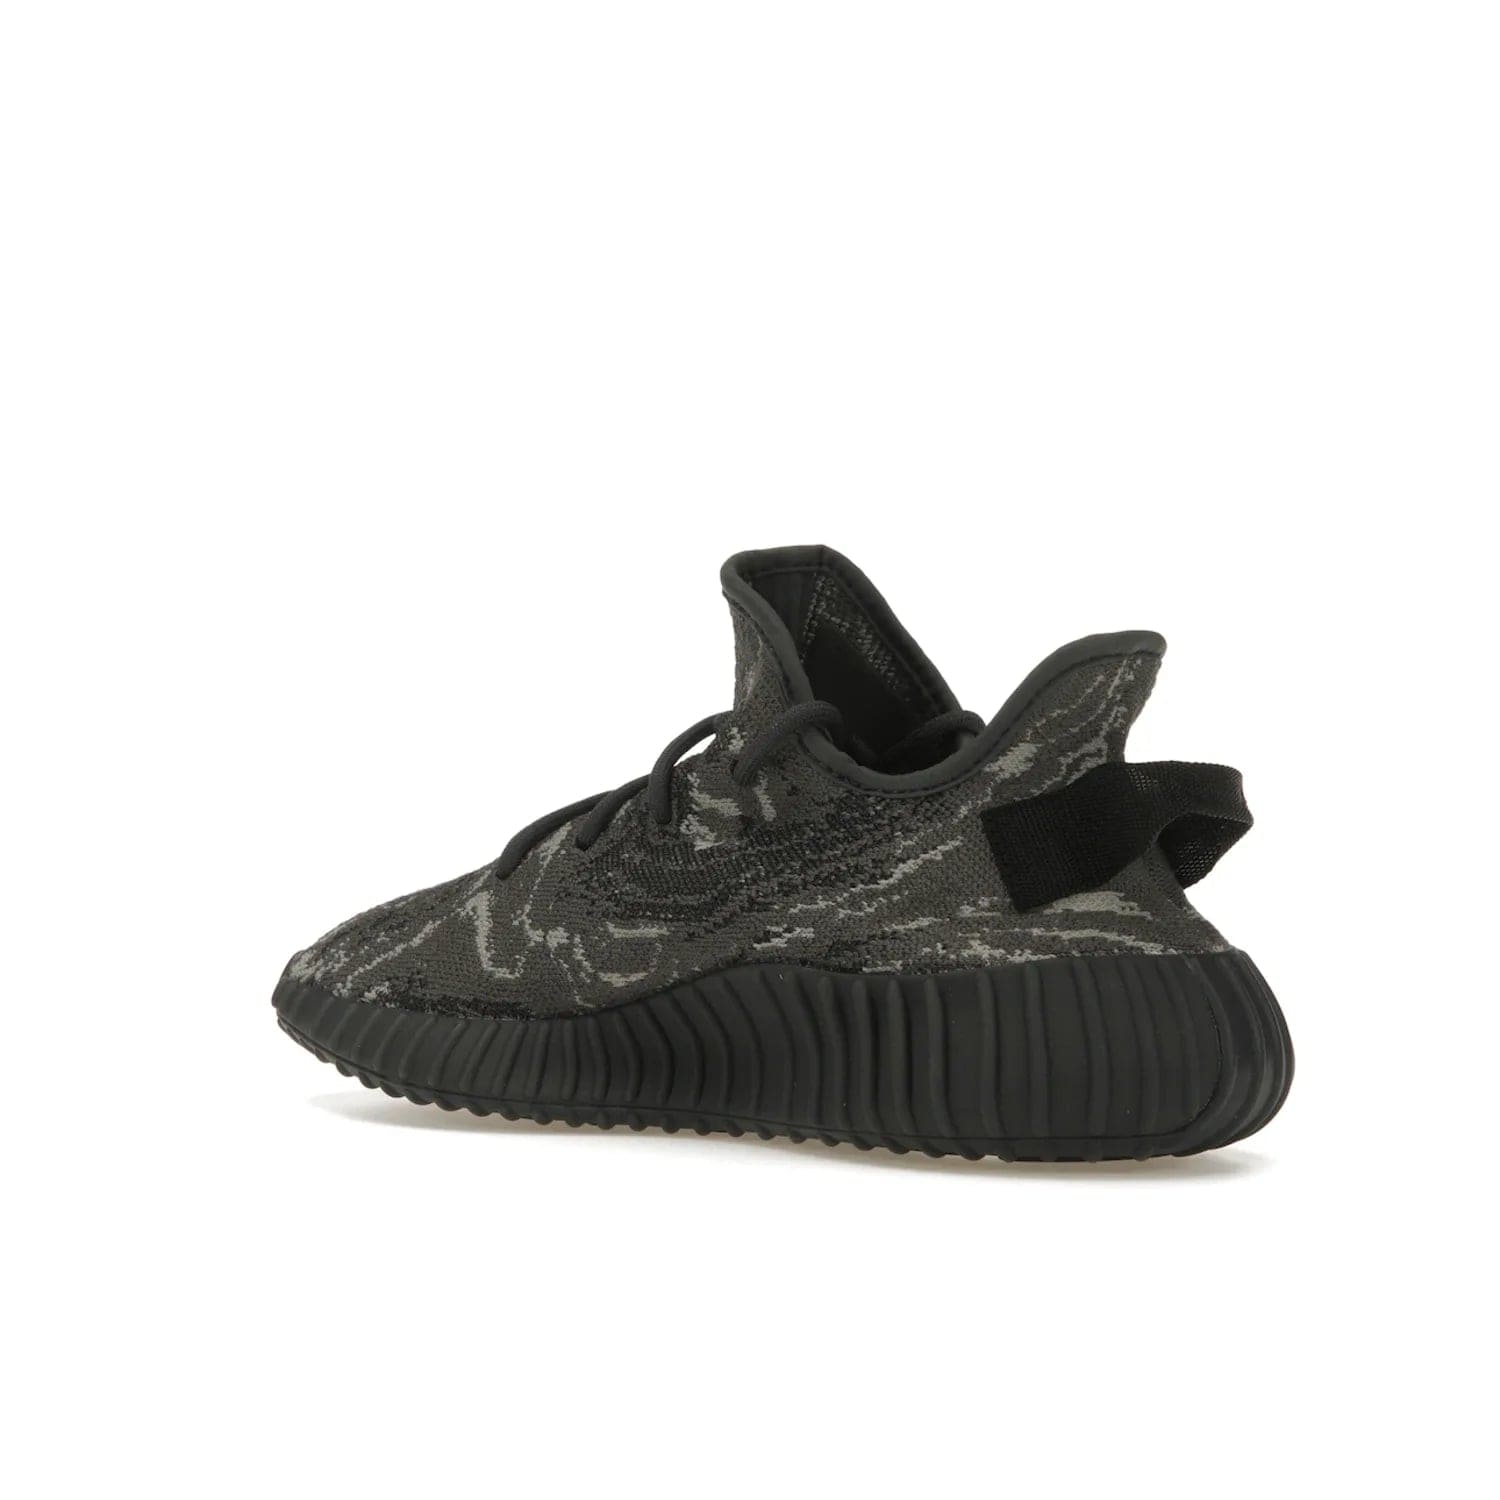 adidas Yeezy Boost 350 V2 MX Dark Salt - Image 23 - Only at www.BallersClubKickz.com - ##
The adidas Yeezy Boost 350 V2 MX Dark Salt offers a contemporary look with a signature combination of grey and black hues. Cushioned Boost midsole and side stripe allow for all day wear. Get the perfect fashion-forward addition with this sleek sneaker for $230.